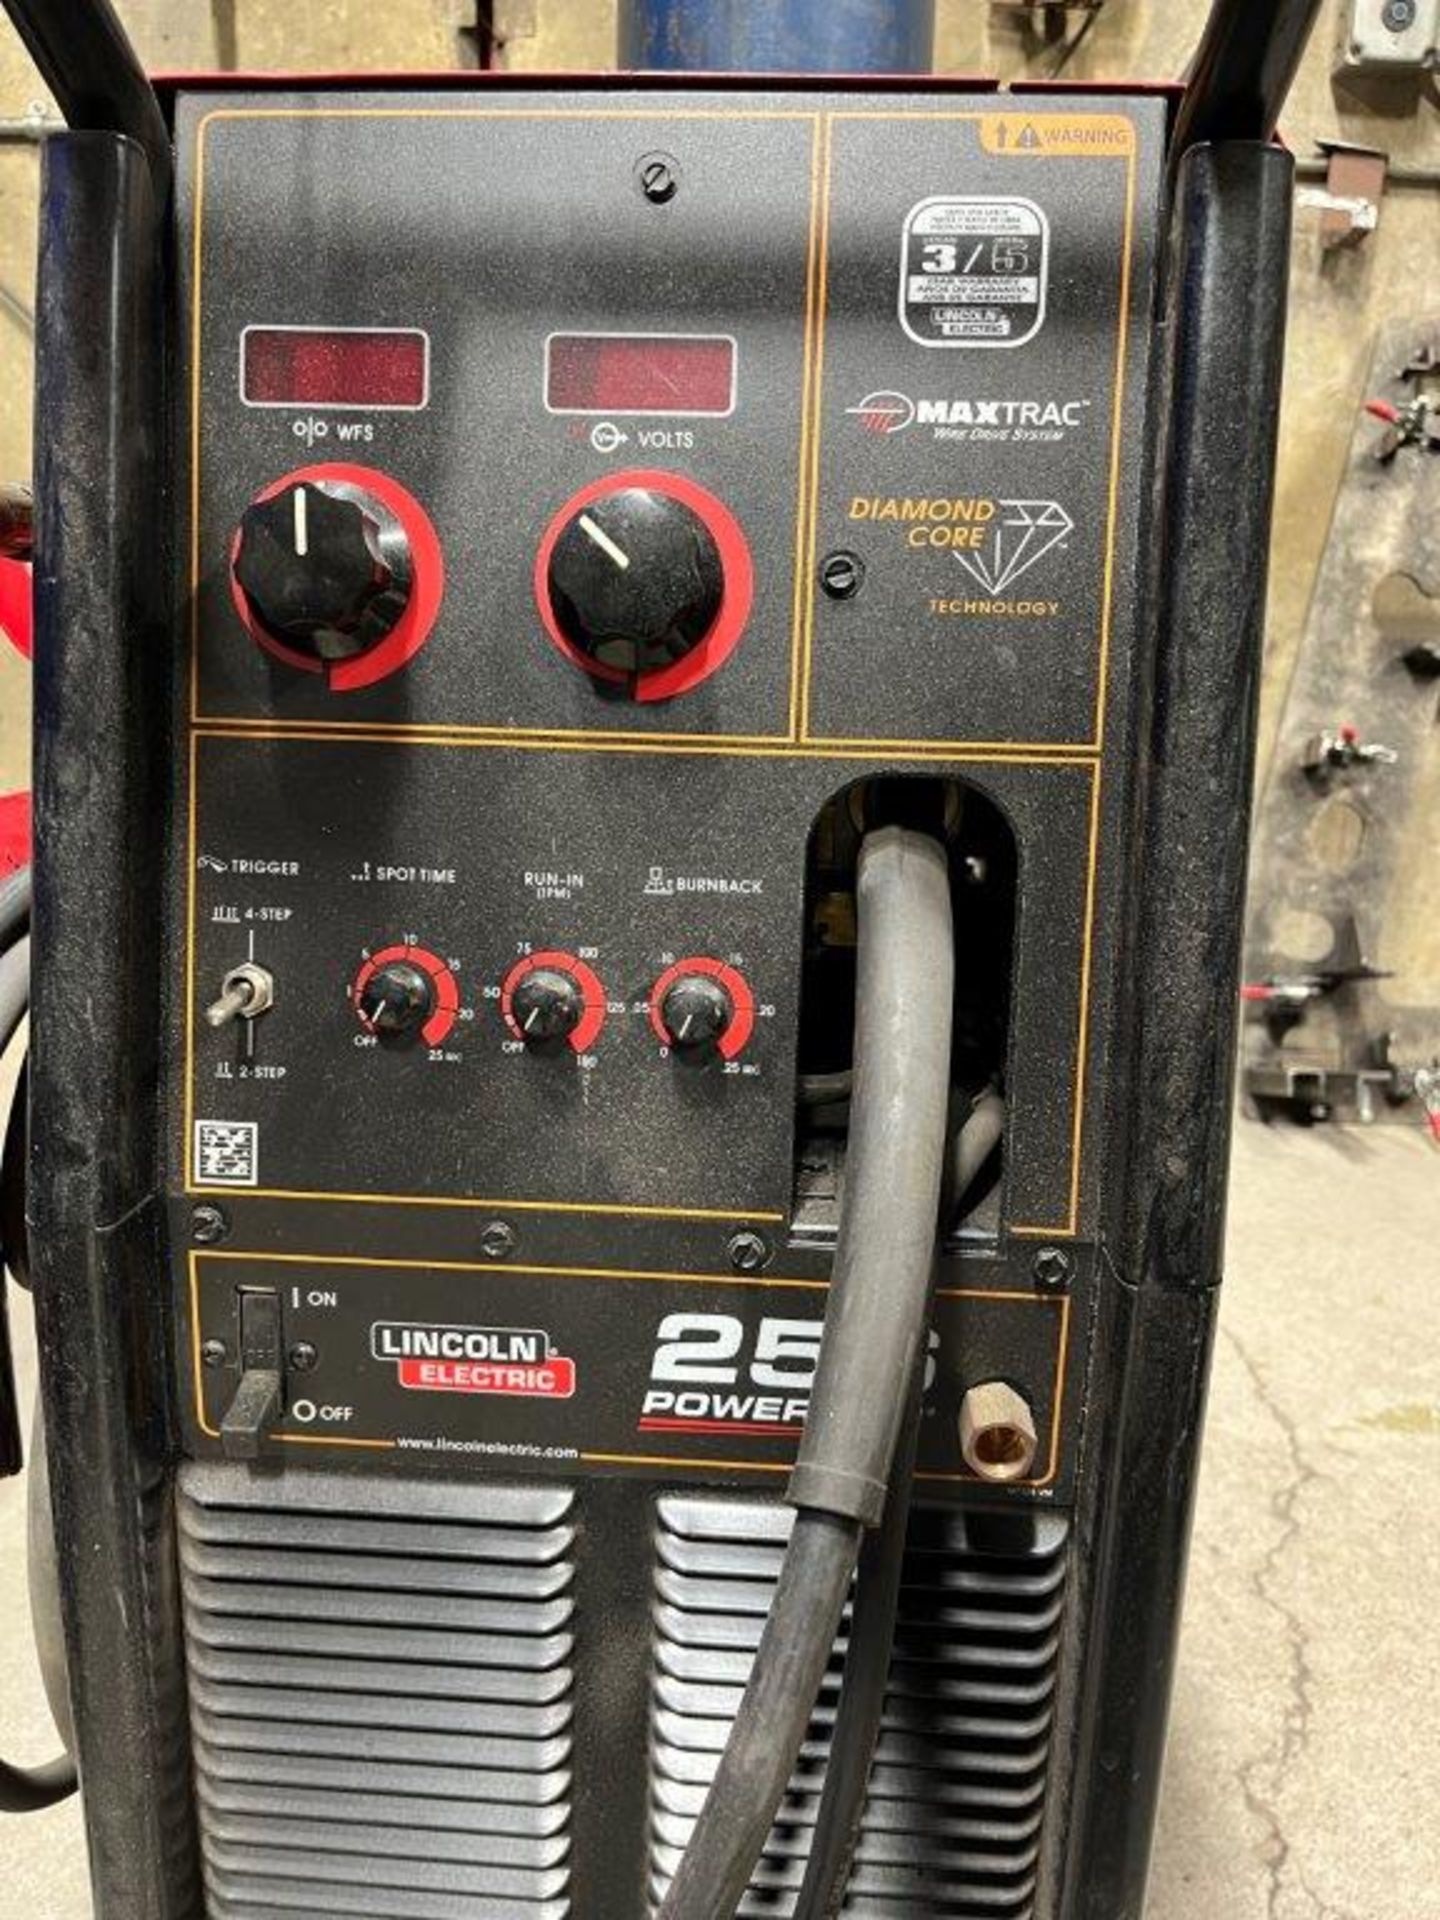 Lincoln 256 Power Mig Welder - Image 2 of 2